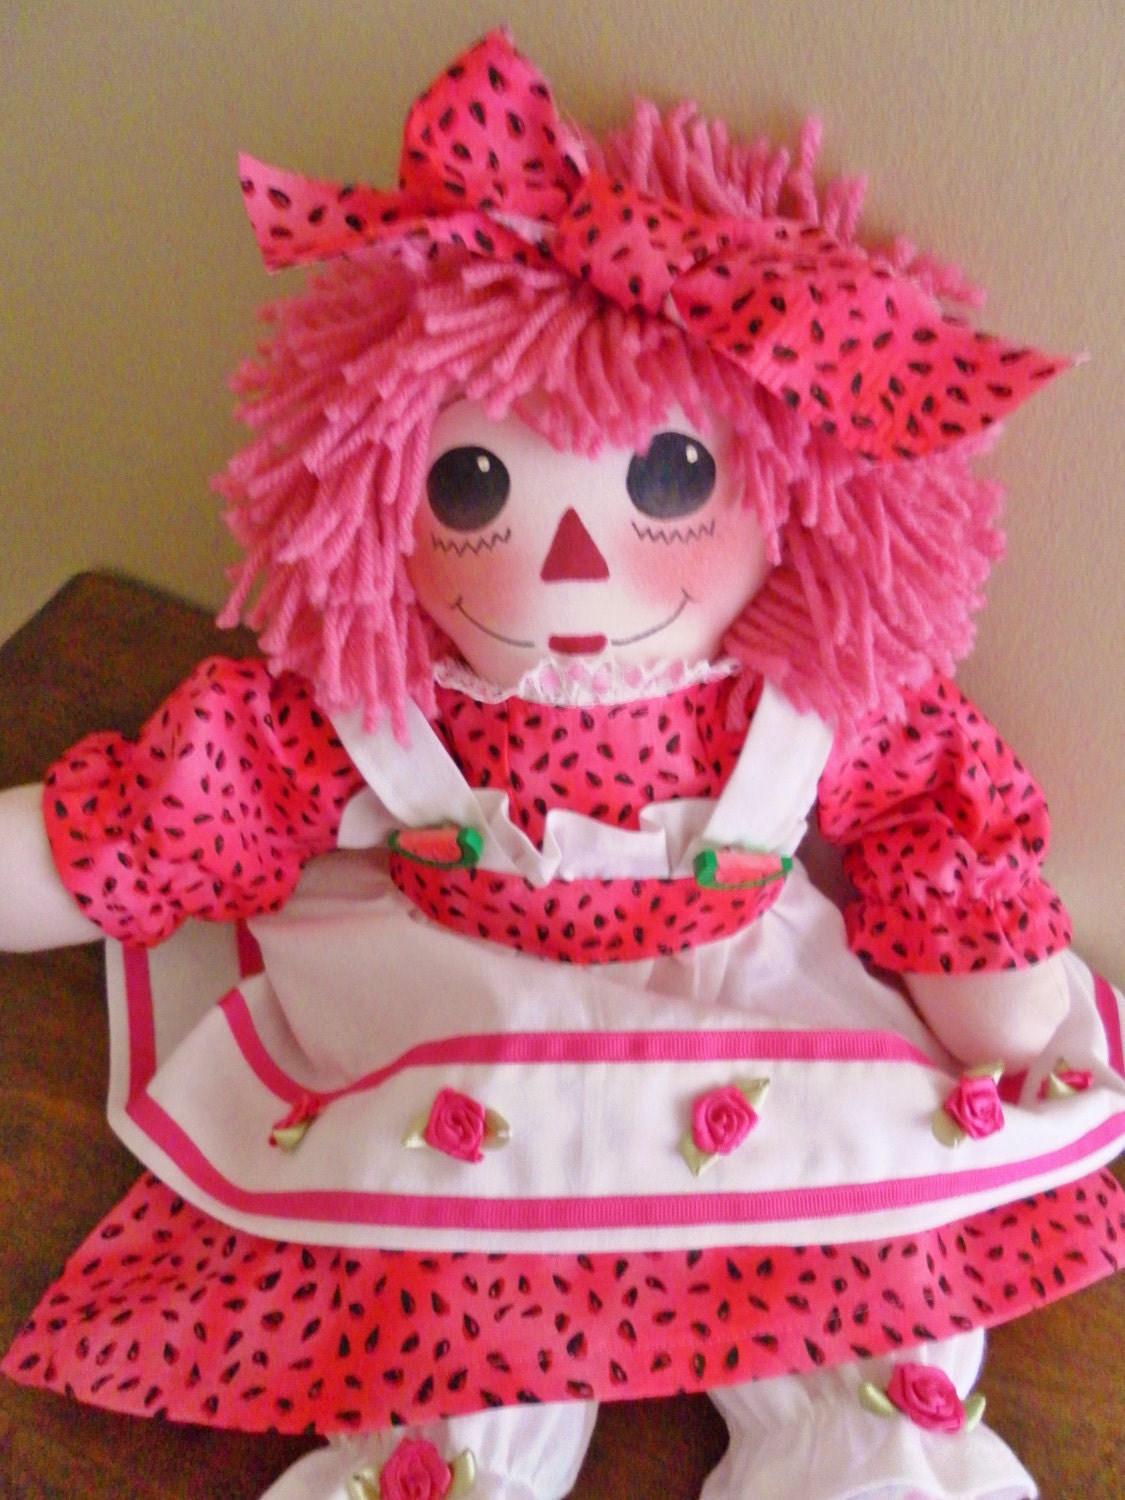 Download 20 Inch Pink Haired Raggedy Ann Doll with Watermelon Seed